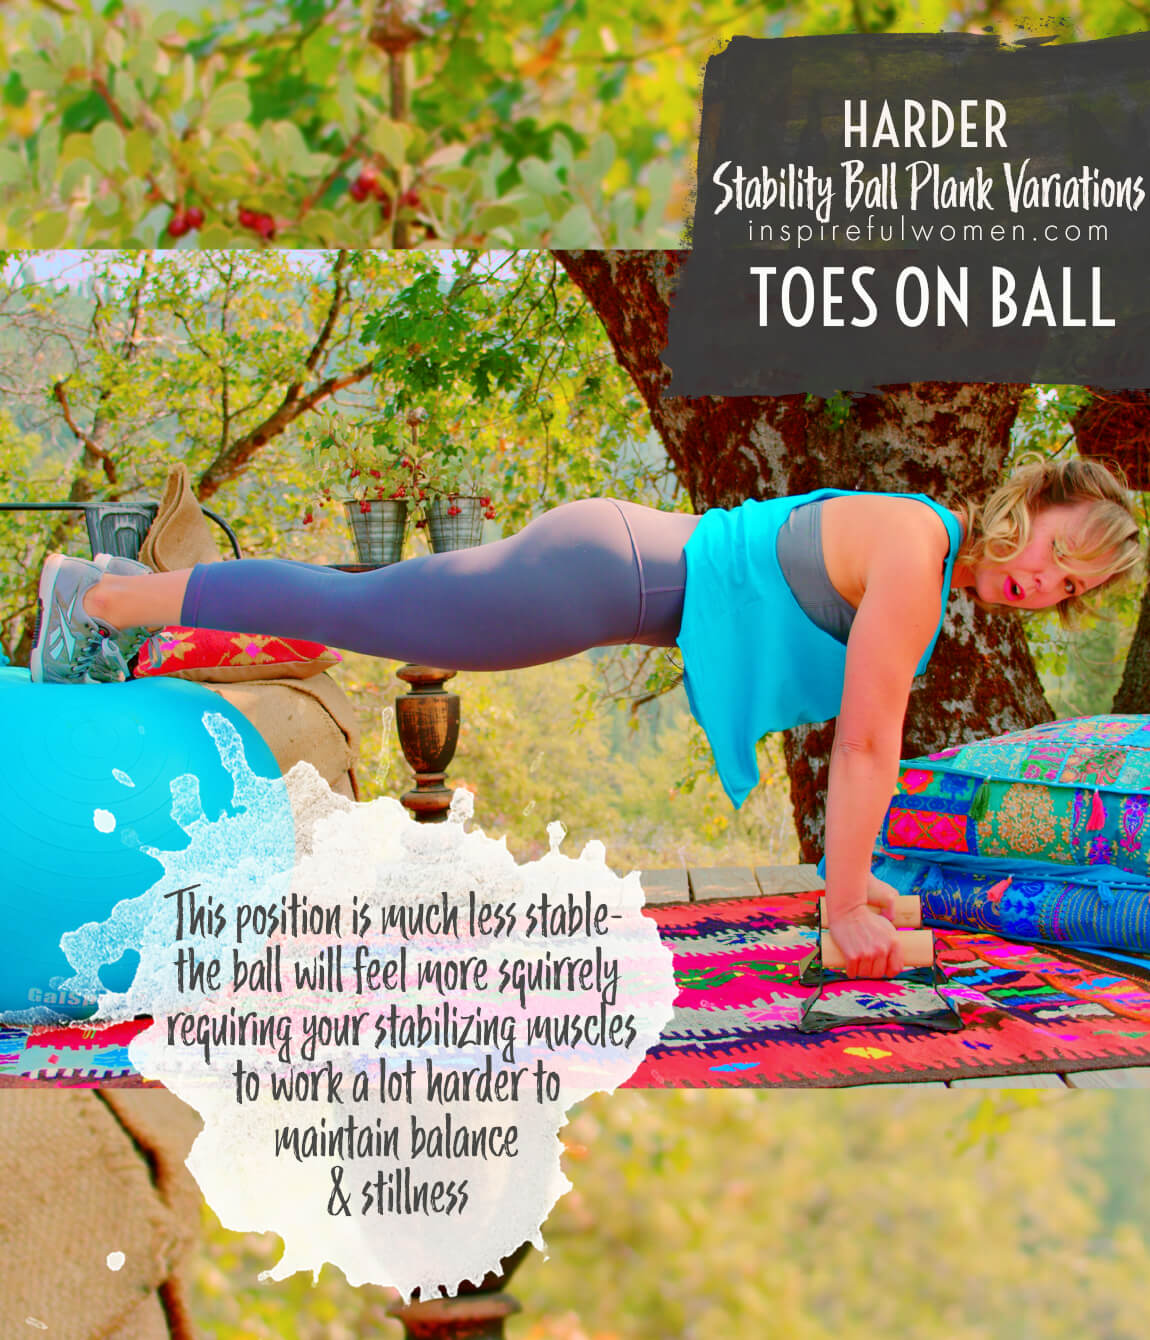 toes-on-ball-stability-ball-plank-prone-neutral-spine-core-at-home-exercise-harder